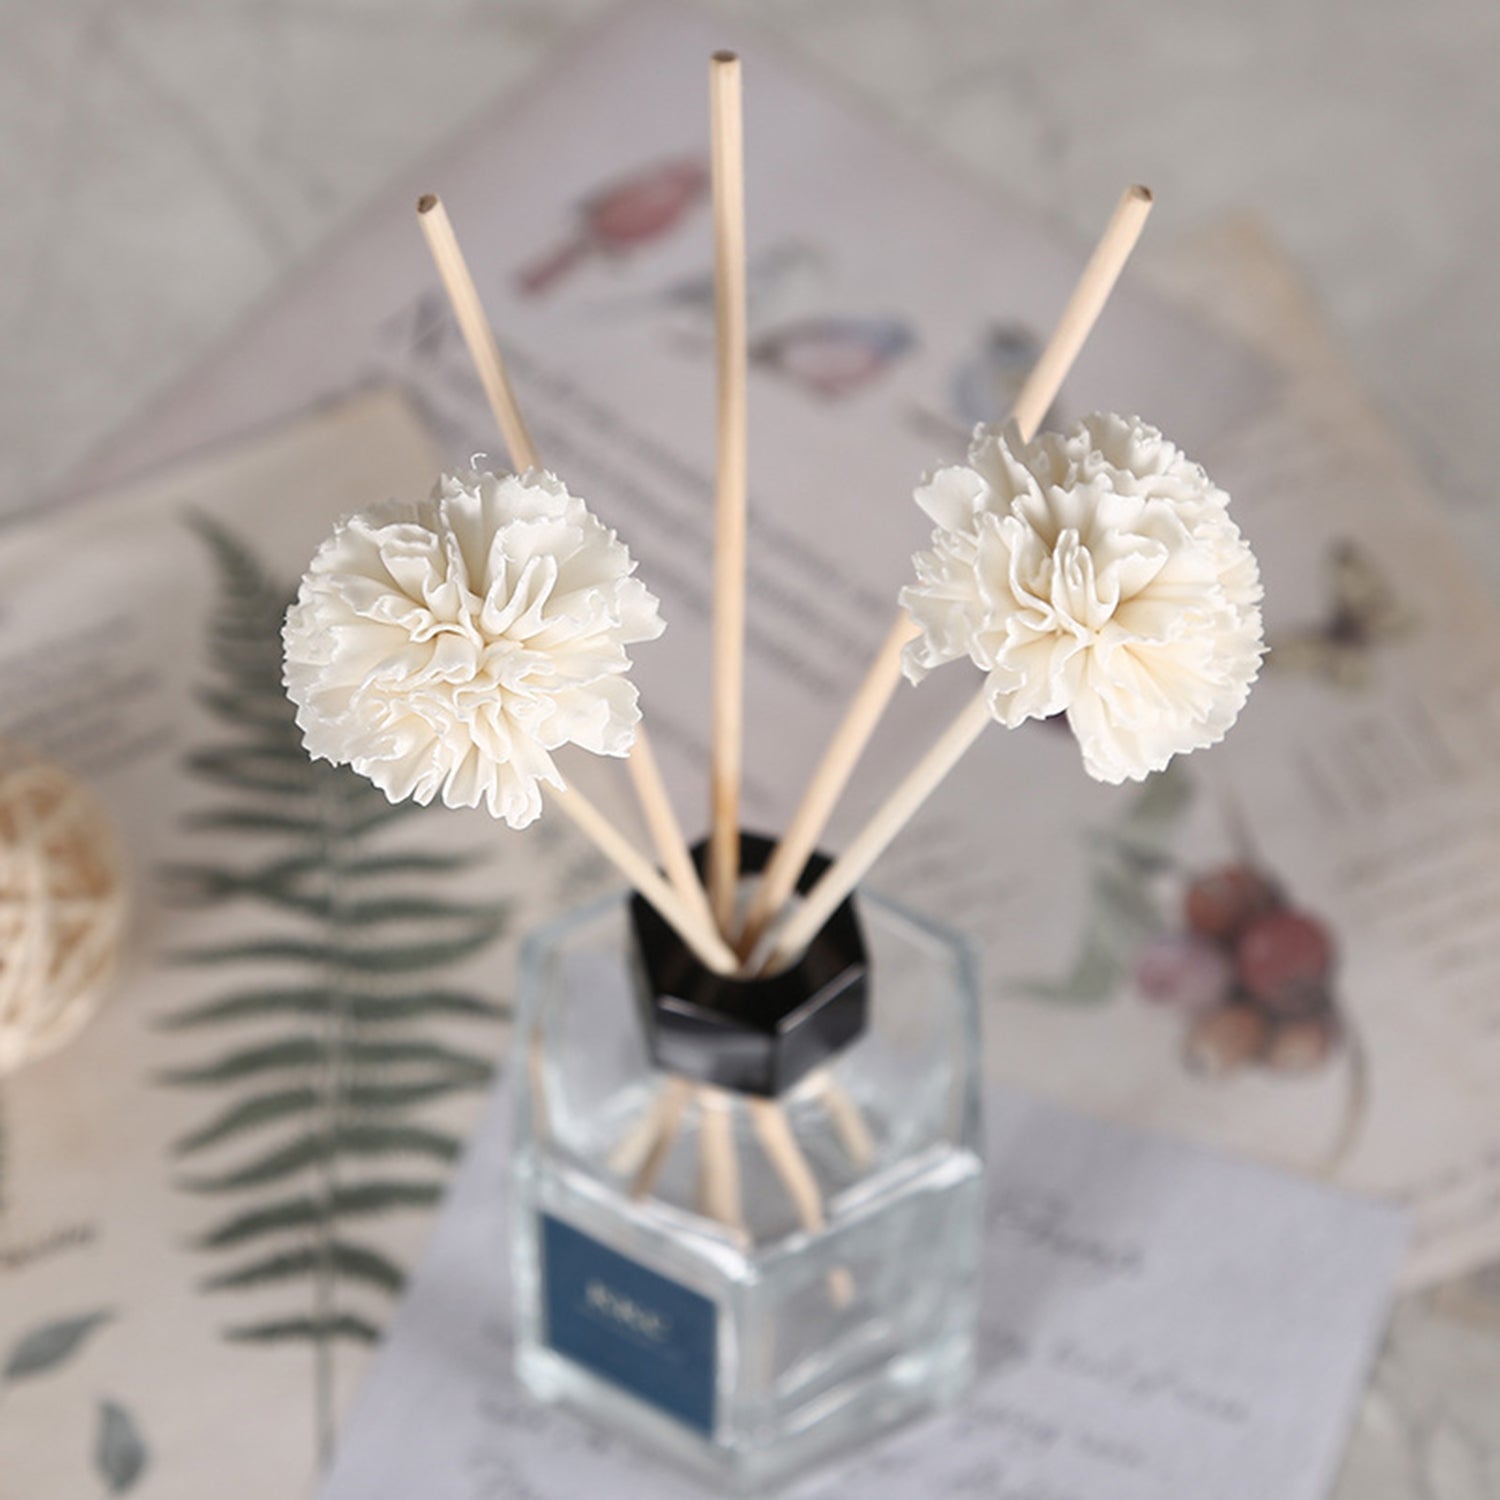 Hand-Made Sola Flower Aromatherapy Reed Diffuser Accessories Tetrapanax Papyrifer Dried Simulated Flowers Reed Diffuser Accessories OEM 